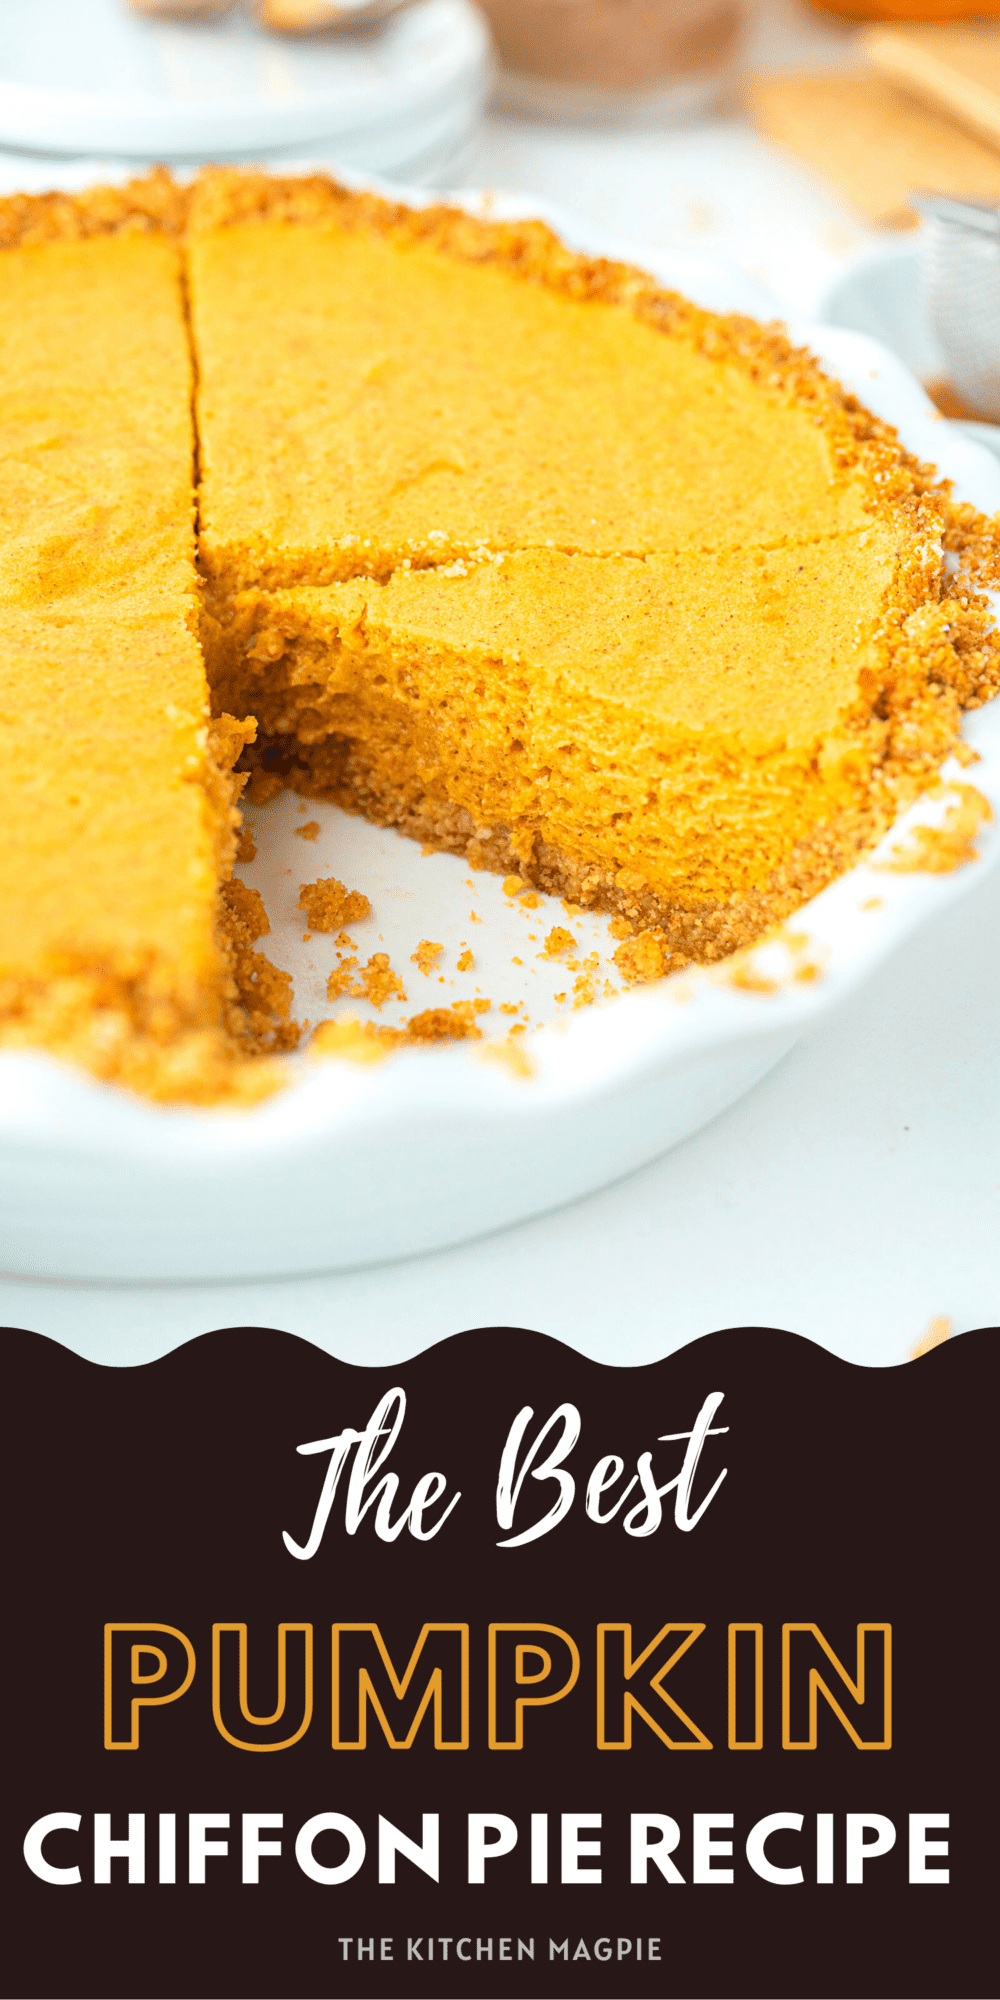 Light as a feather, spicy pumpkin chiffon pie! Make sure to use pasteurized egg whites in this recipe for food safety.